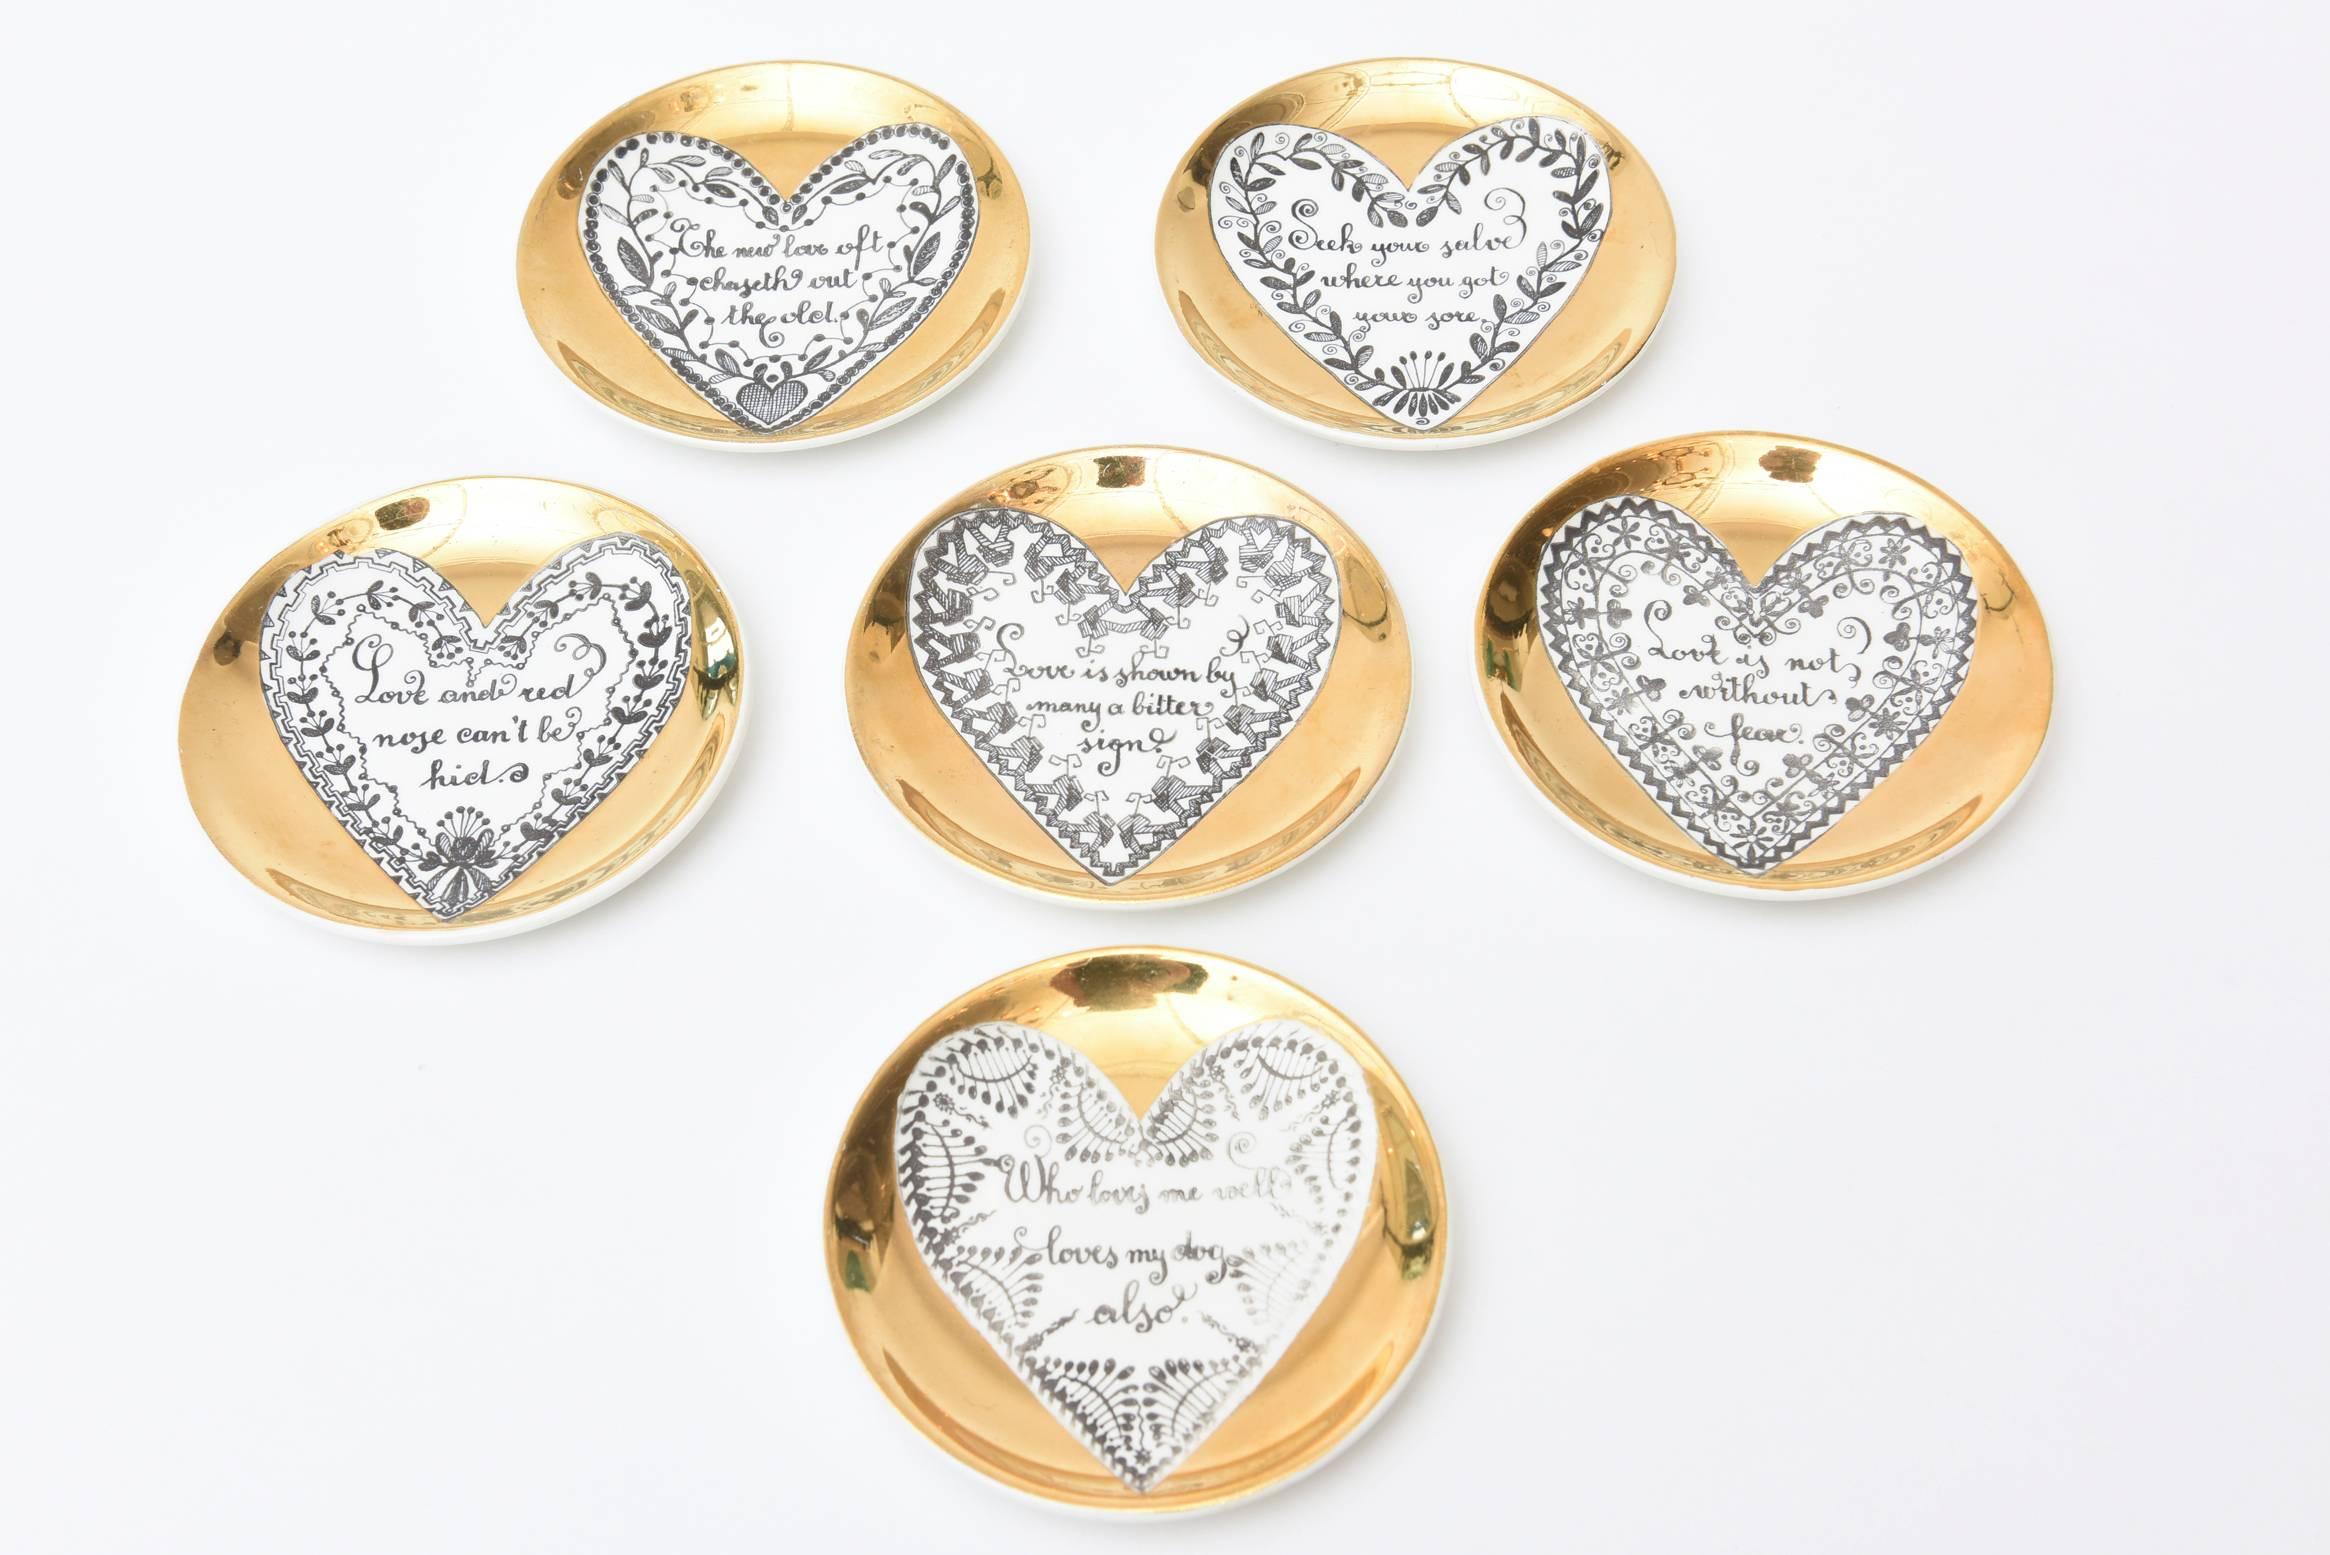 These delightful and romantic verbages are depicted within the heart shape of these hallmarked Piero Fornasetti vintage gilded porcelain Love coasters and or small plates. Sold as a set of 6 as they were originally made. They are Mid-Century Modern